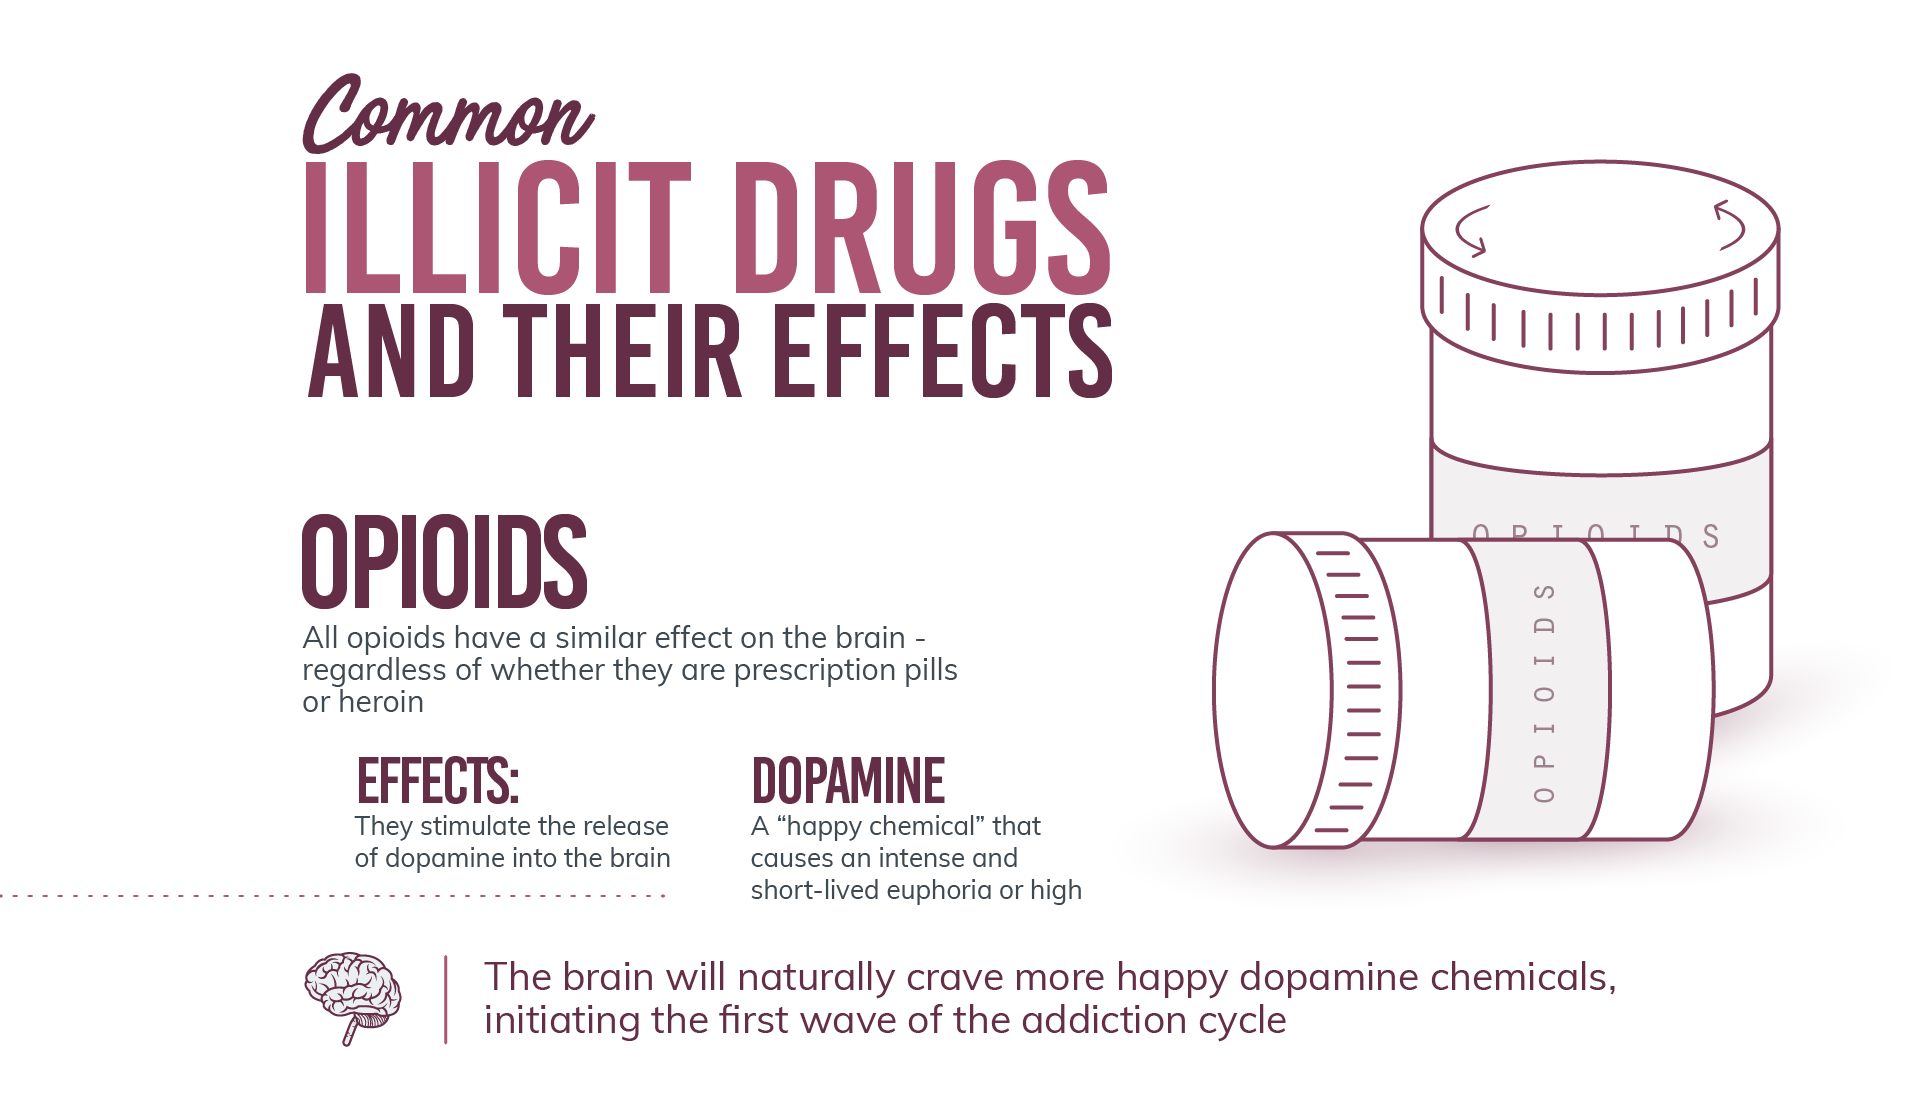 Opiods are a common illicit drug, all opiods have a similar effect on the brain regardless of whether they are prescription pills or heroin, opiods stimulate the release of dopamine into the brain, dopamine is a "happy chemical" that causes an intense and short-lived euphoria or high. The brain will naturally crave more happy dopamine chemicals. initiating the first wave of the addiction cycle